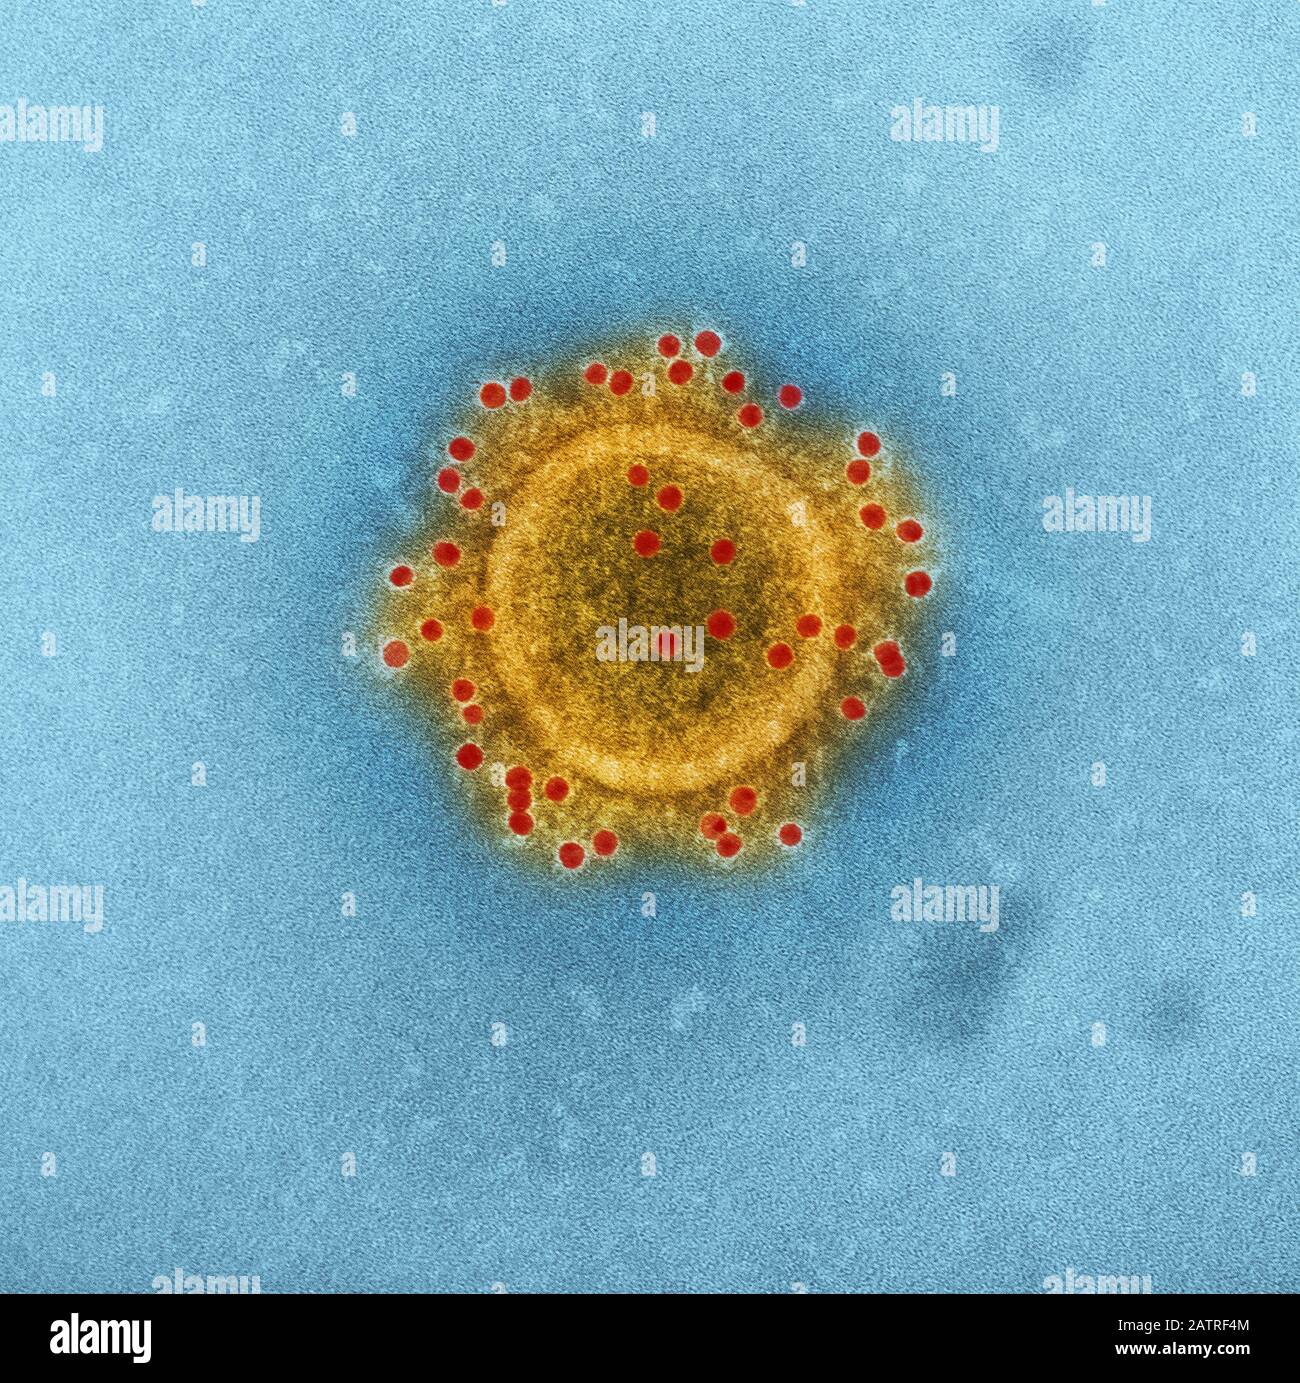 Highly magnified, digitally colorized transmission electron microscopic (TEM) image of the particle envelope of a single, spherical shaped, Middle East respiratory syndrome coronavirus (MERS-CoV) virion, 2014. MERs is in the same family as the novel coronavirus which began to infect patients in Wuhan, China in early 2020. Courtesy National Institute of Allergy and Infectious Diseases (NIAID)/CDC. Image produced in 2014. () Stock Photo